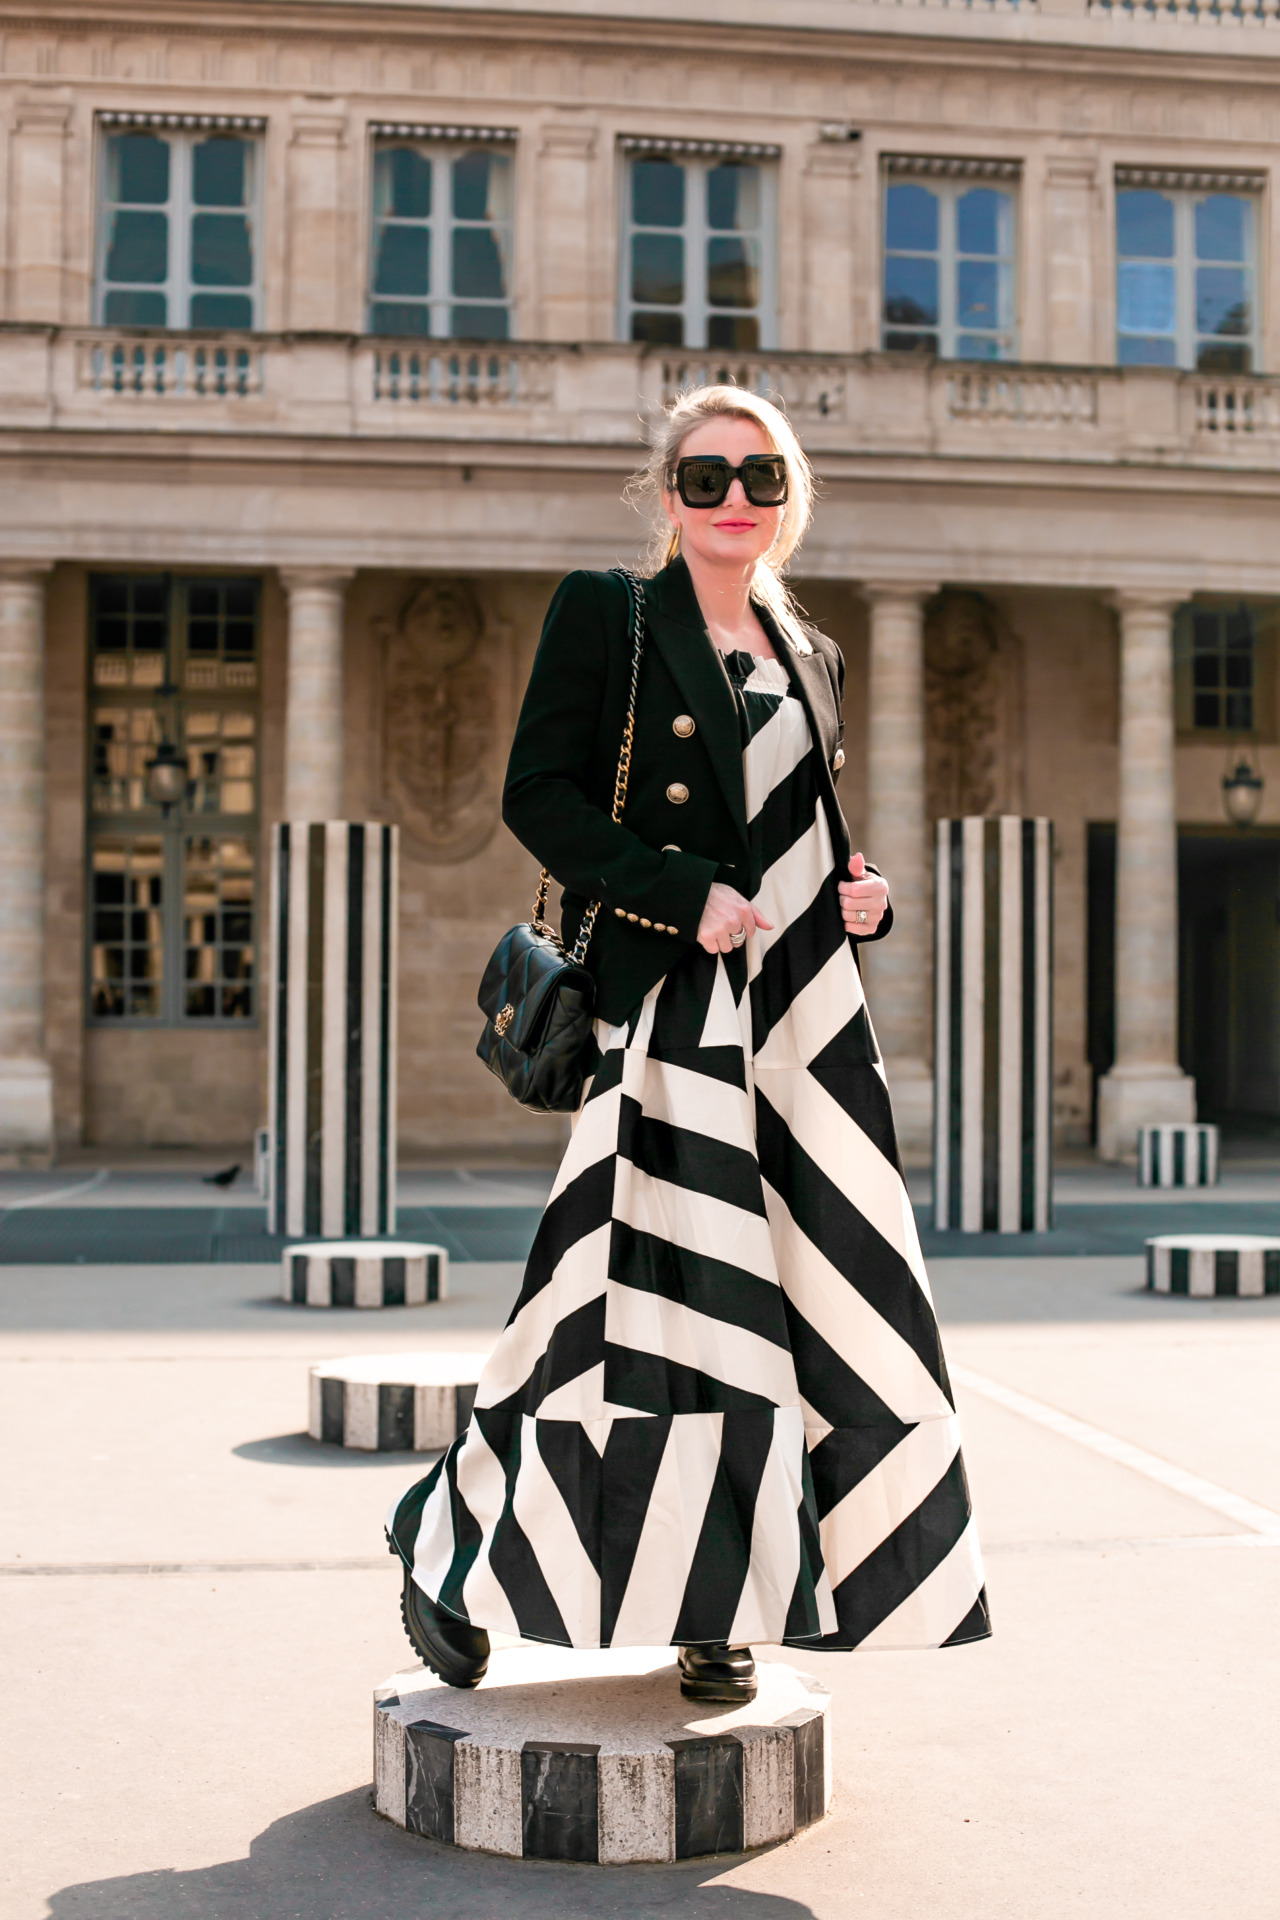 what to pack for paris, what to pack for paris fashion week, paris fashion week packing list, what I wore at paris fashion week, what I pack for a trip to paris, paris packing list, paris in febraury, erin busbee, busbee style, fashion over 40, paris, france, white and black striped tory burch maxi dress, see by chloe combat boots, gucci sunlgasses, chanel flap bag, black balmain blazer